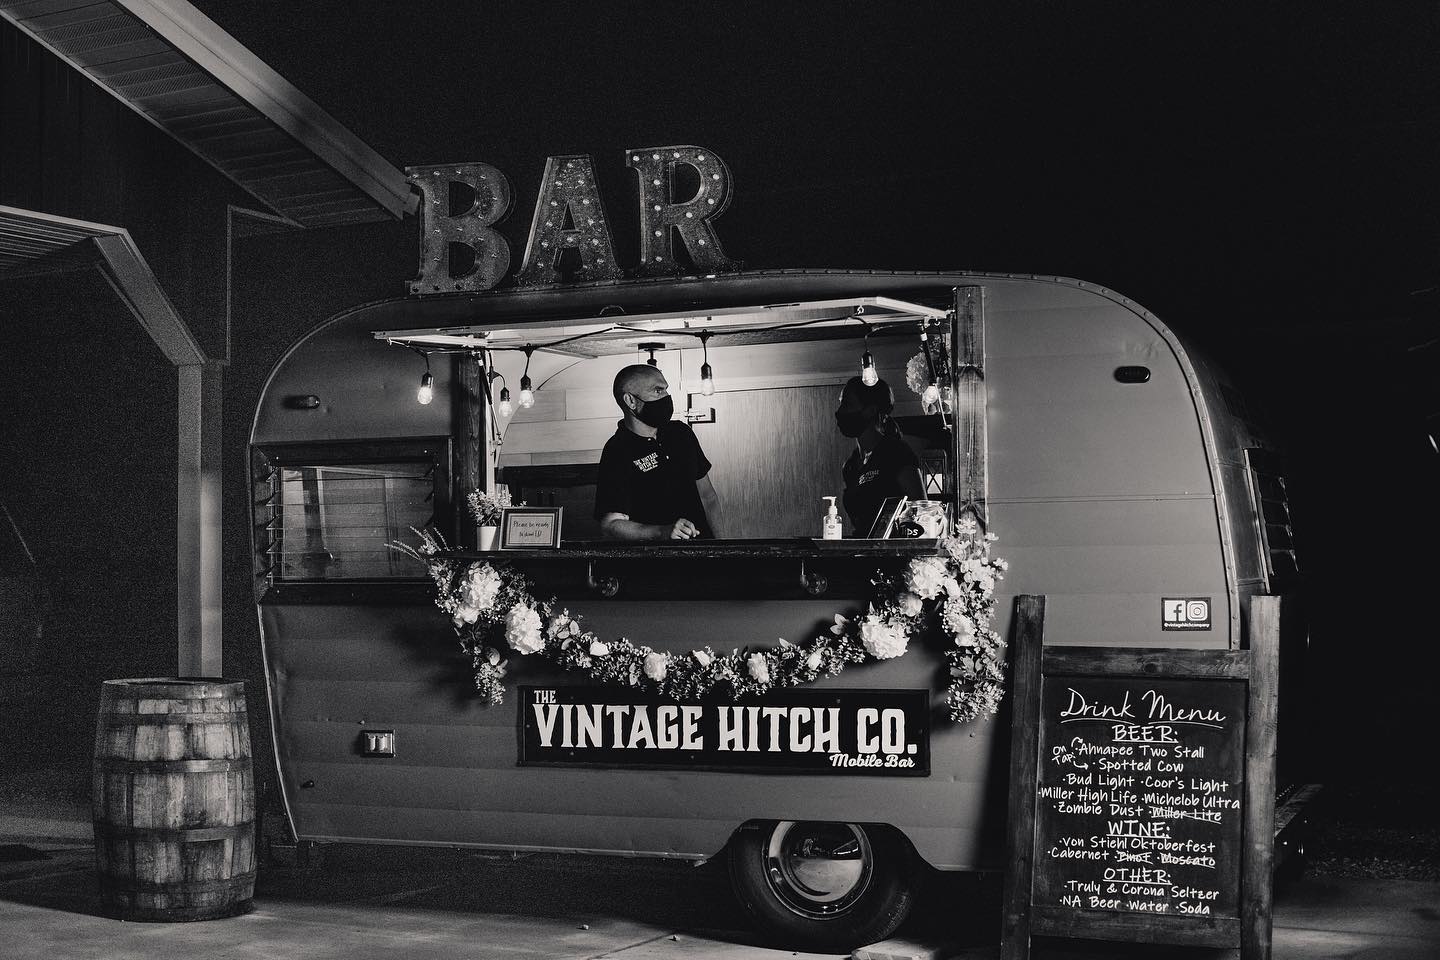 The Vintage Hitch Mobile Bar